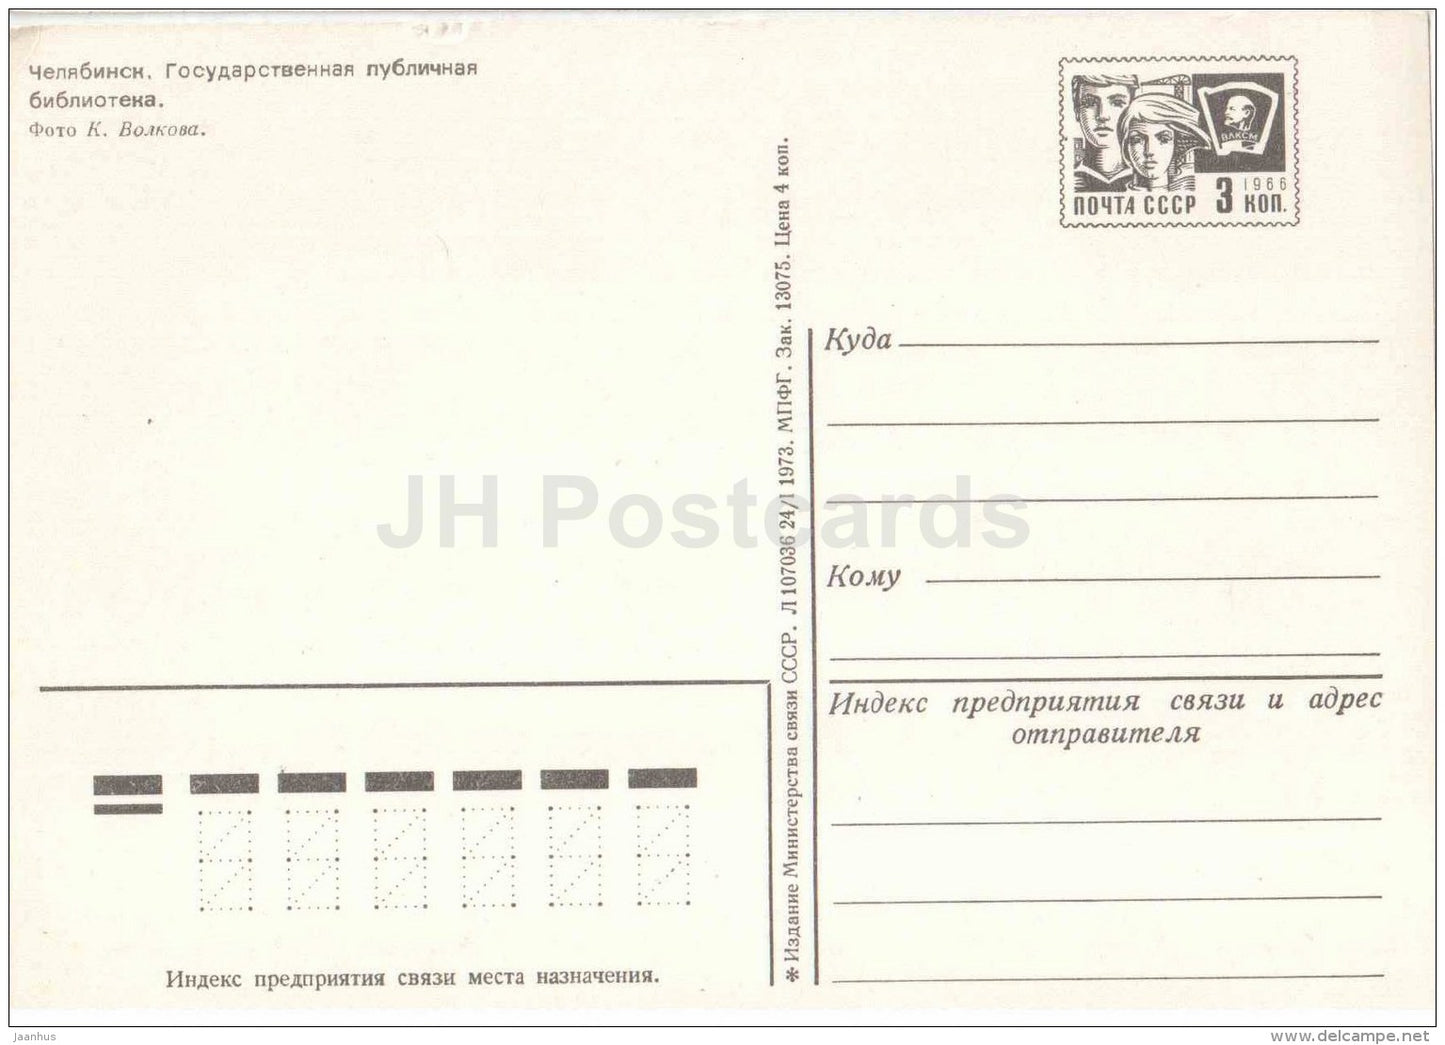 State Public Library - Chelyabinsk - postal stationery - 1973 - Russia USSR - unused - JH Postcards